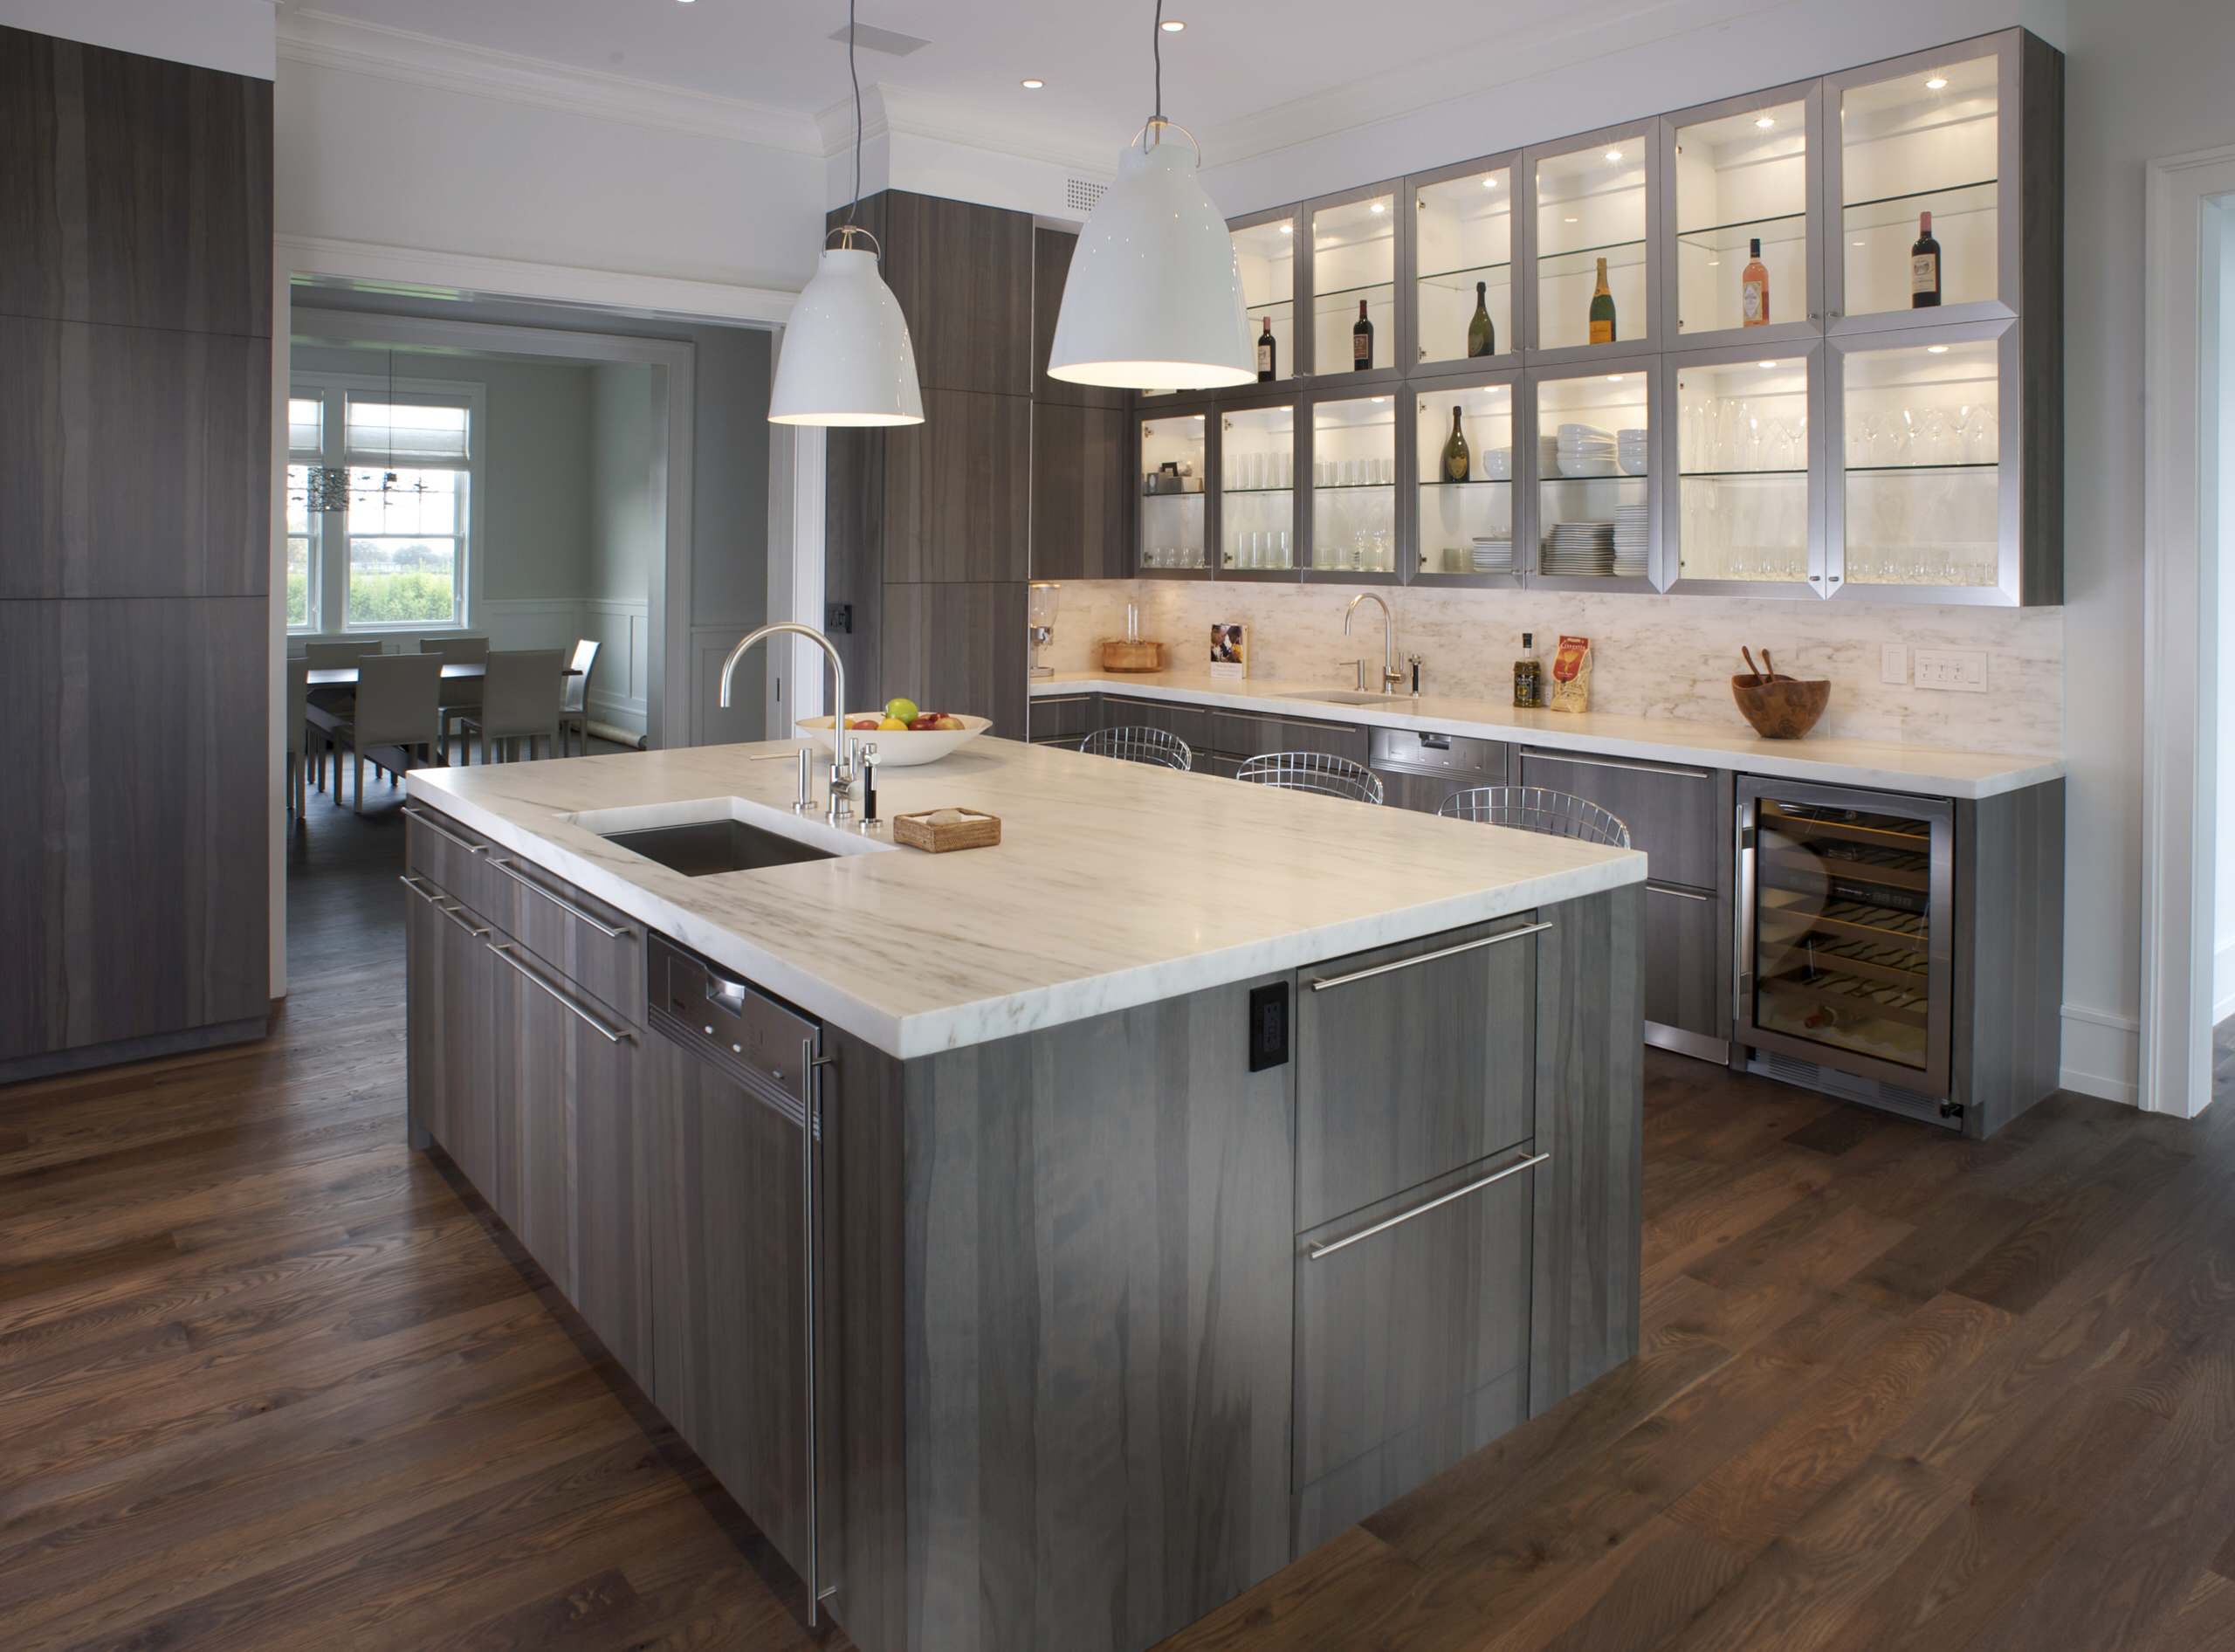 Kitchens - Contemporary - Kitchen - New York - by East End Country Kitchens  | Houzz